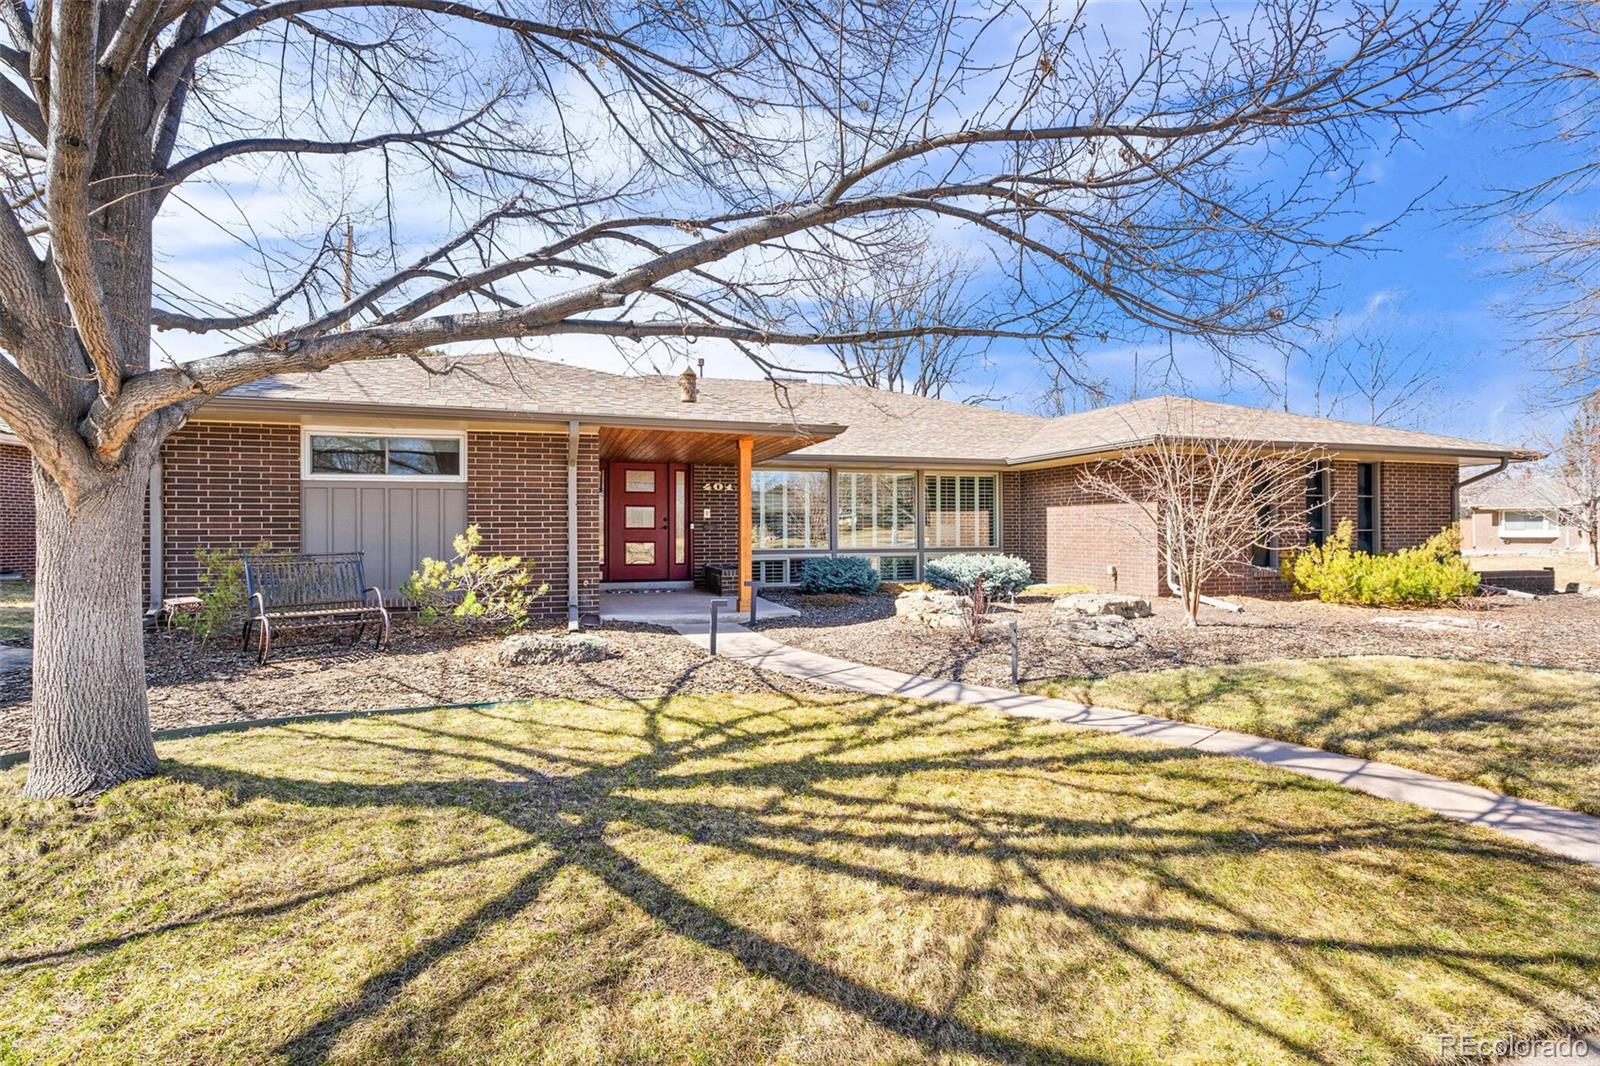 401 s magnolia street, Denver sold home. Closed on 2024-03-26 for $1,280,000.